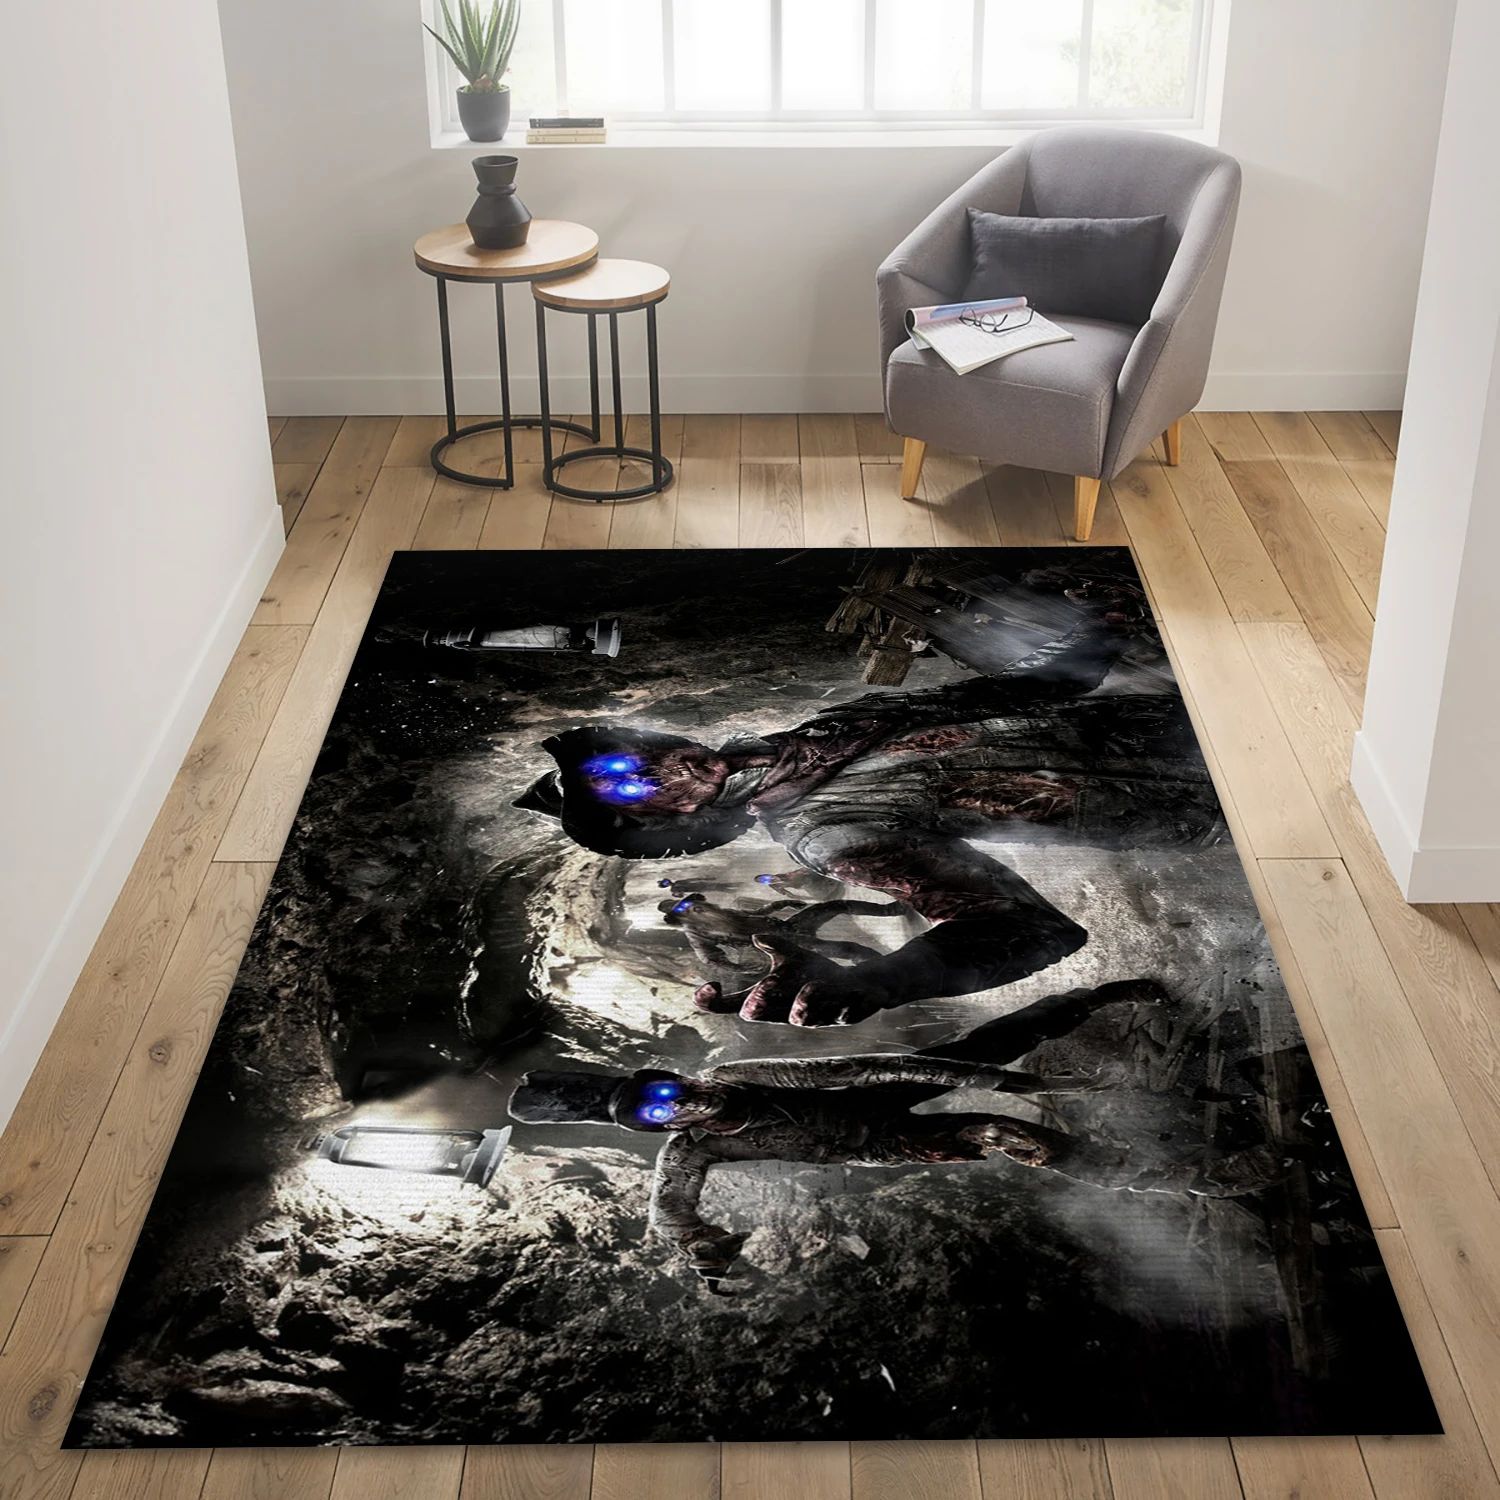 Call Of Duty Black Ops Ii Video Game Area Rug For Christmas, Area Rug - Home Decor Floor Decor - Indoor Outdoor Rugs 2